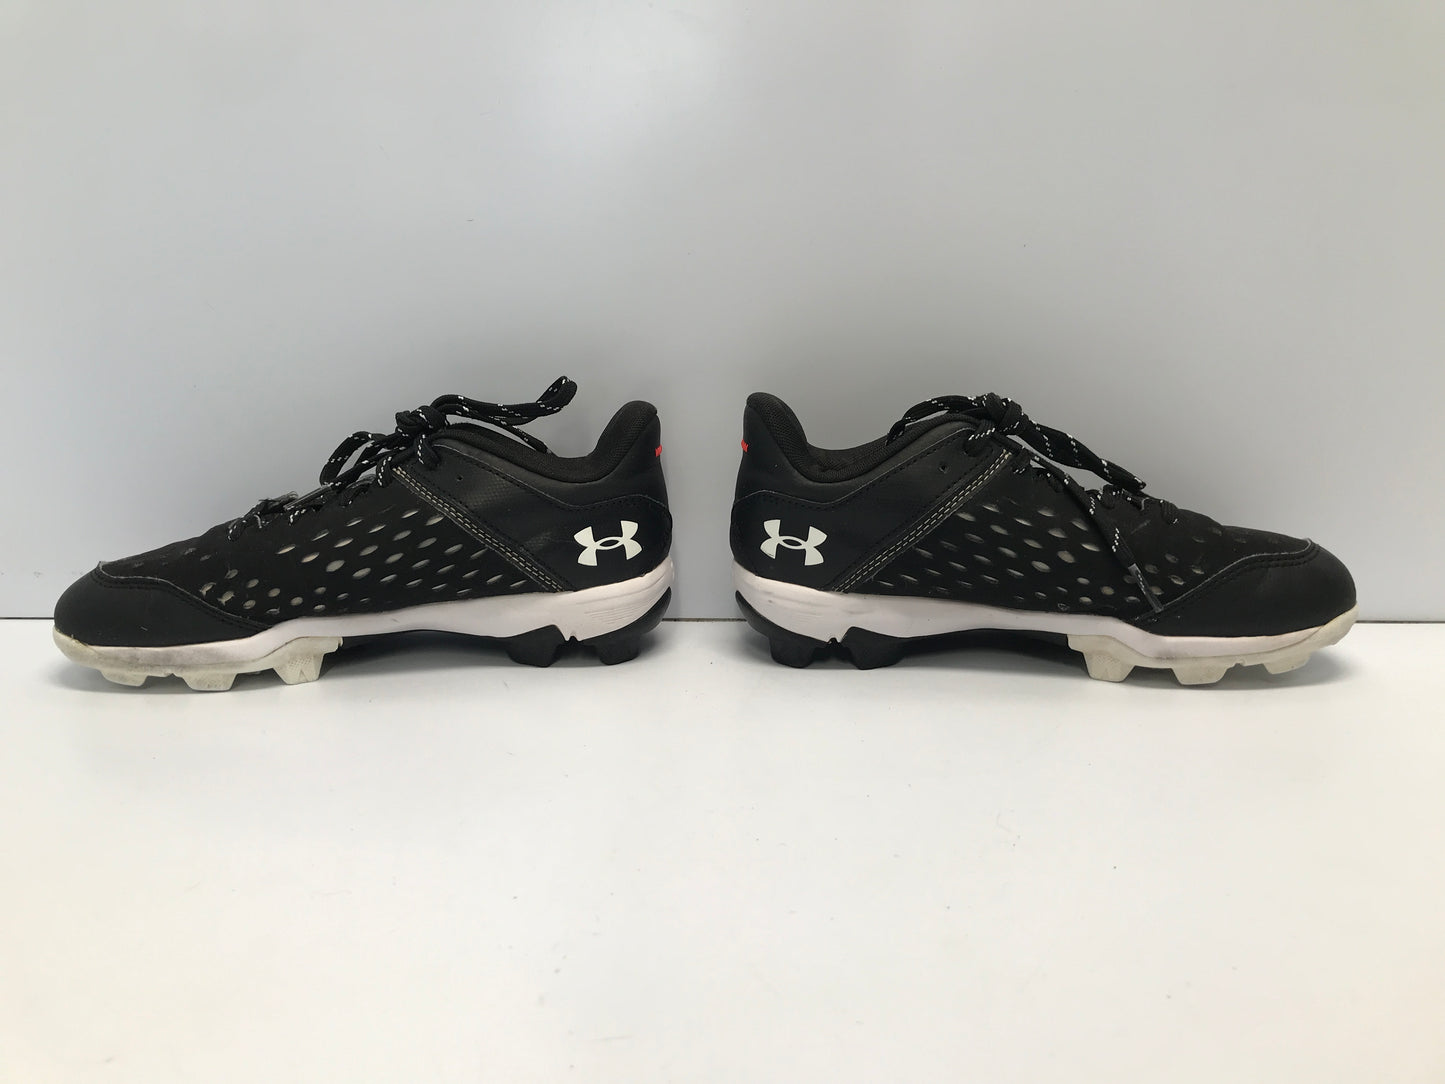 Baseball Shoes Cleats Child Size 4 Under Armour  Black White  Like New